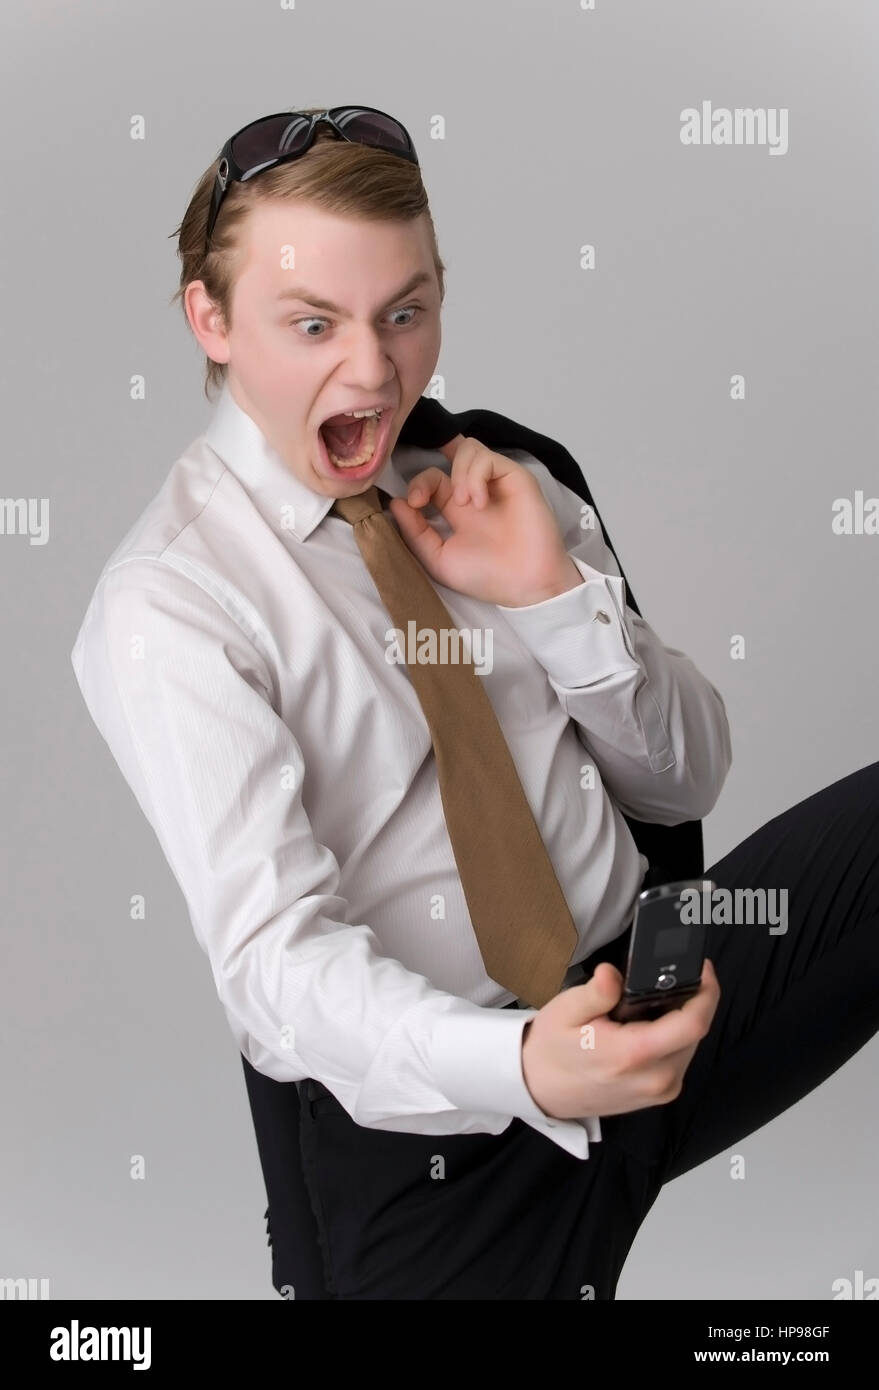 Model released , Junger Gesch?ftsmann mit Handy - young businessman with mobile phone Stock Photo